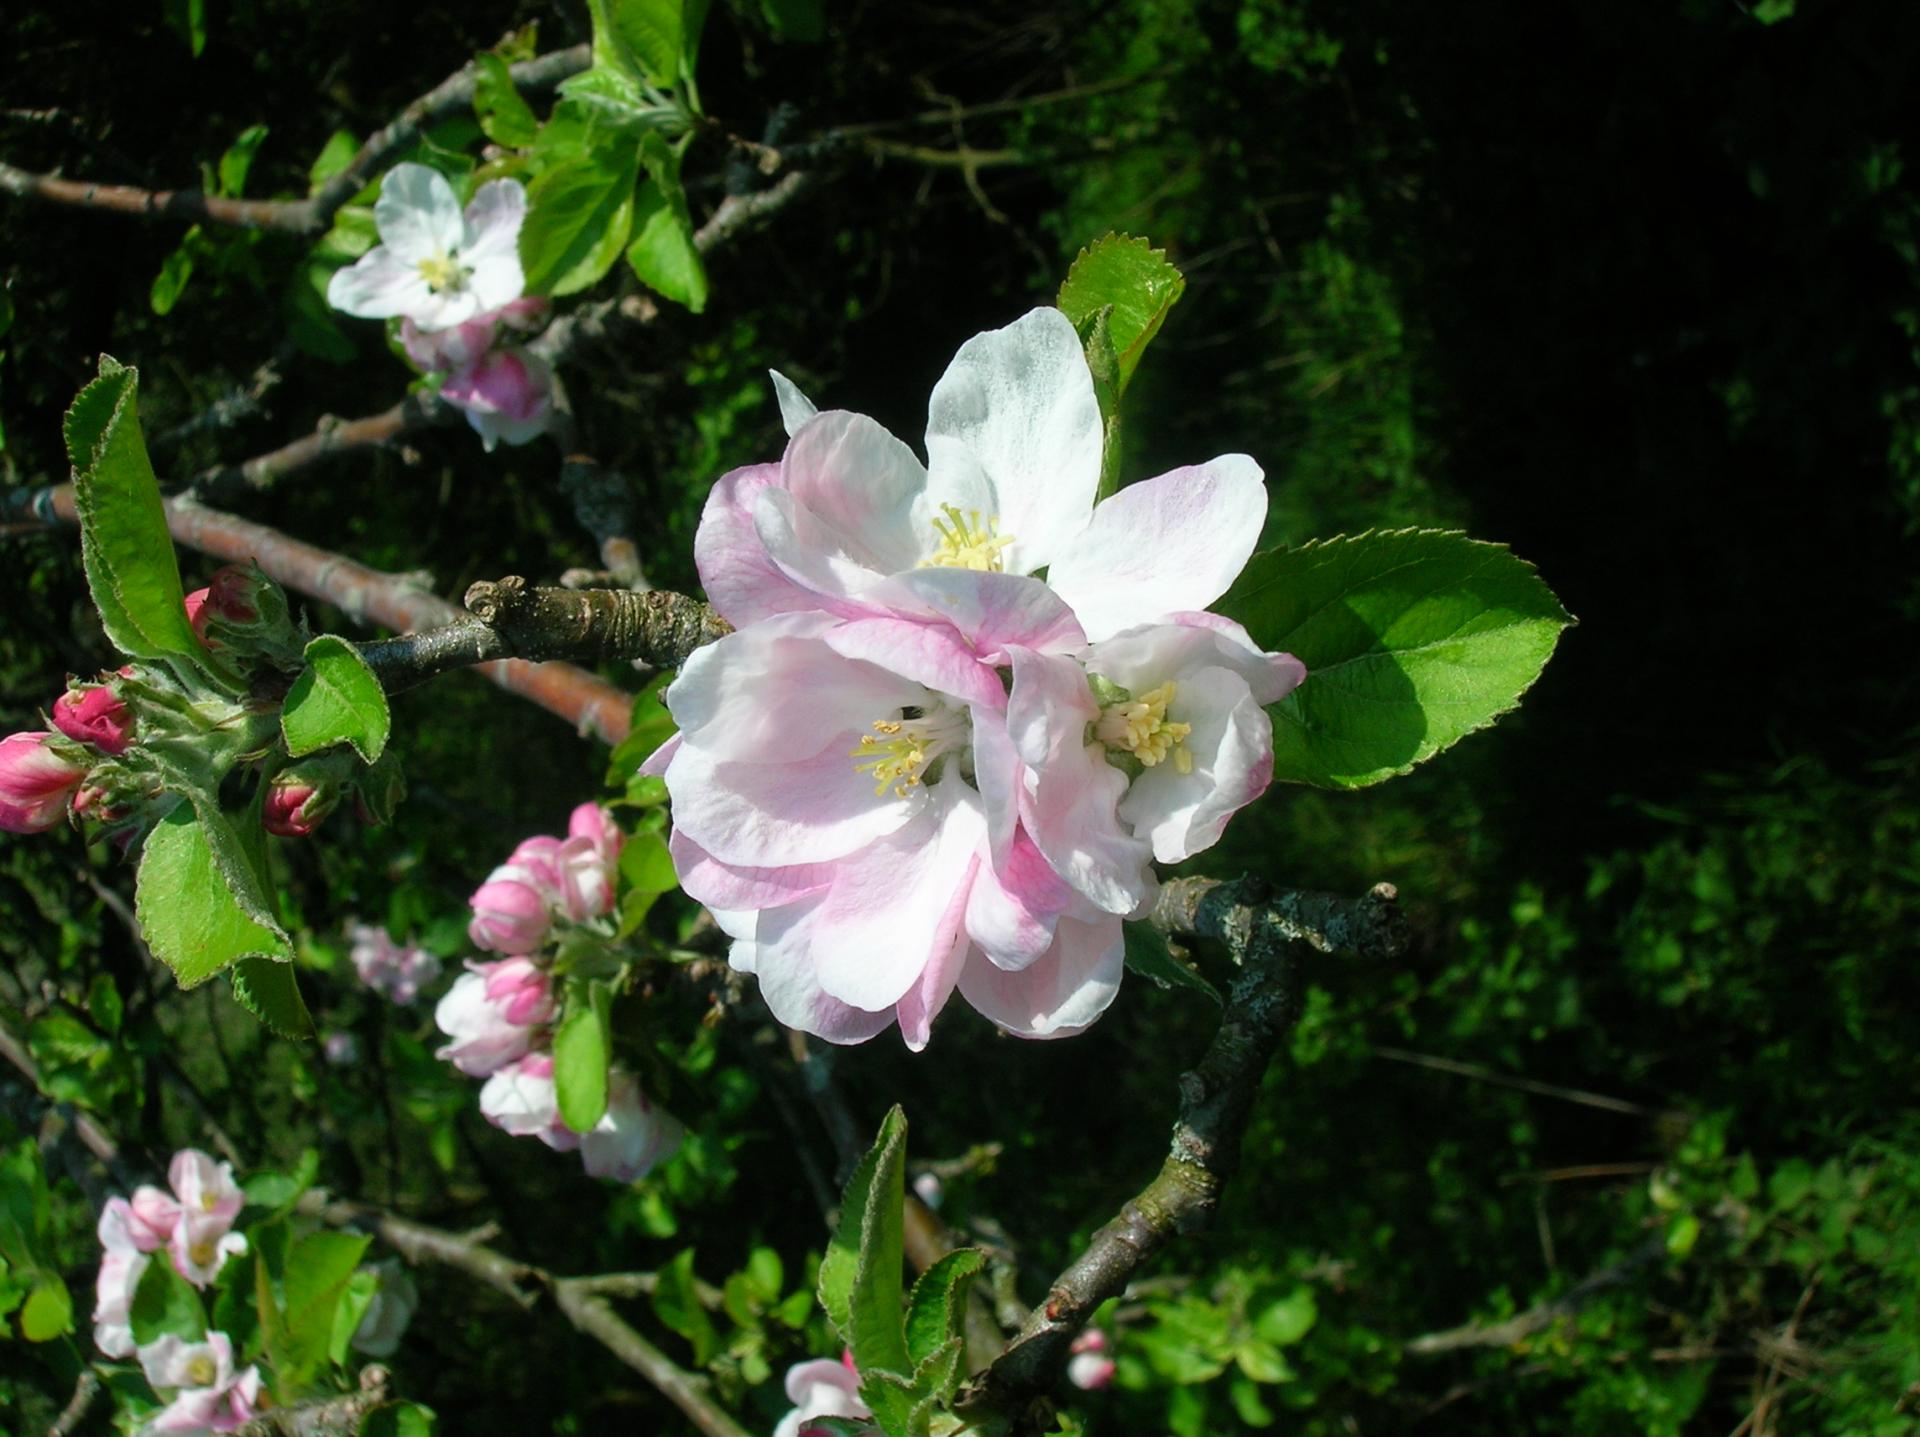 Apple blossom season is a wonderful time for all the senses.